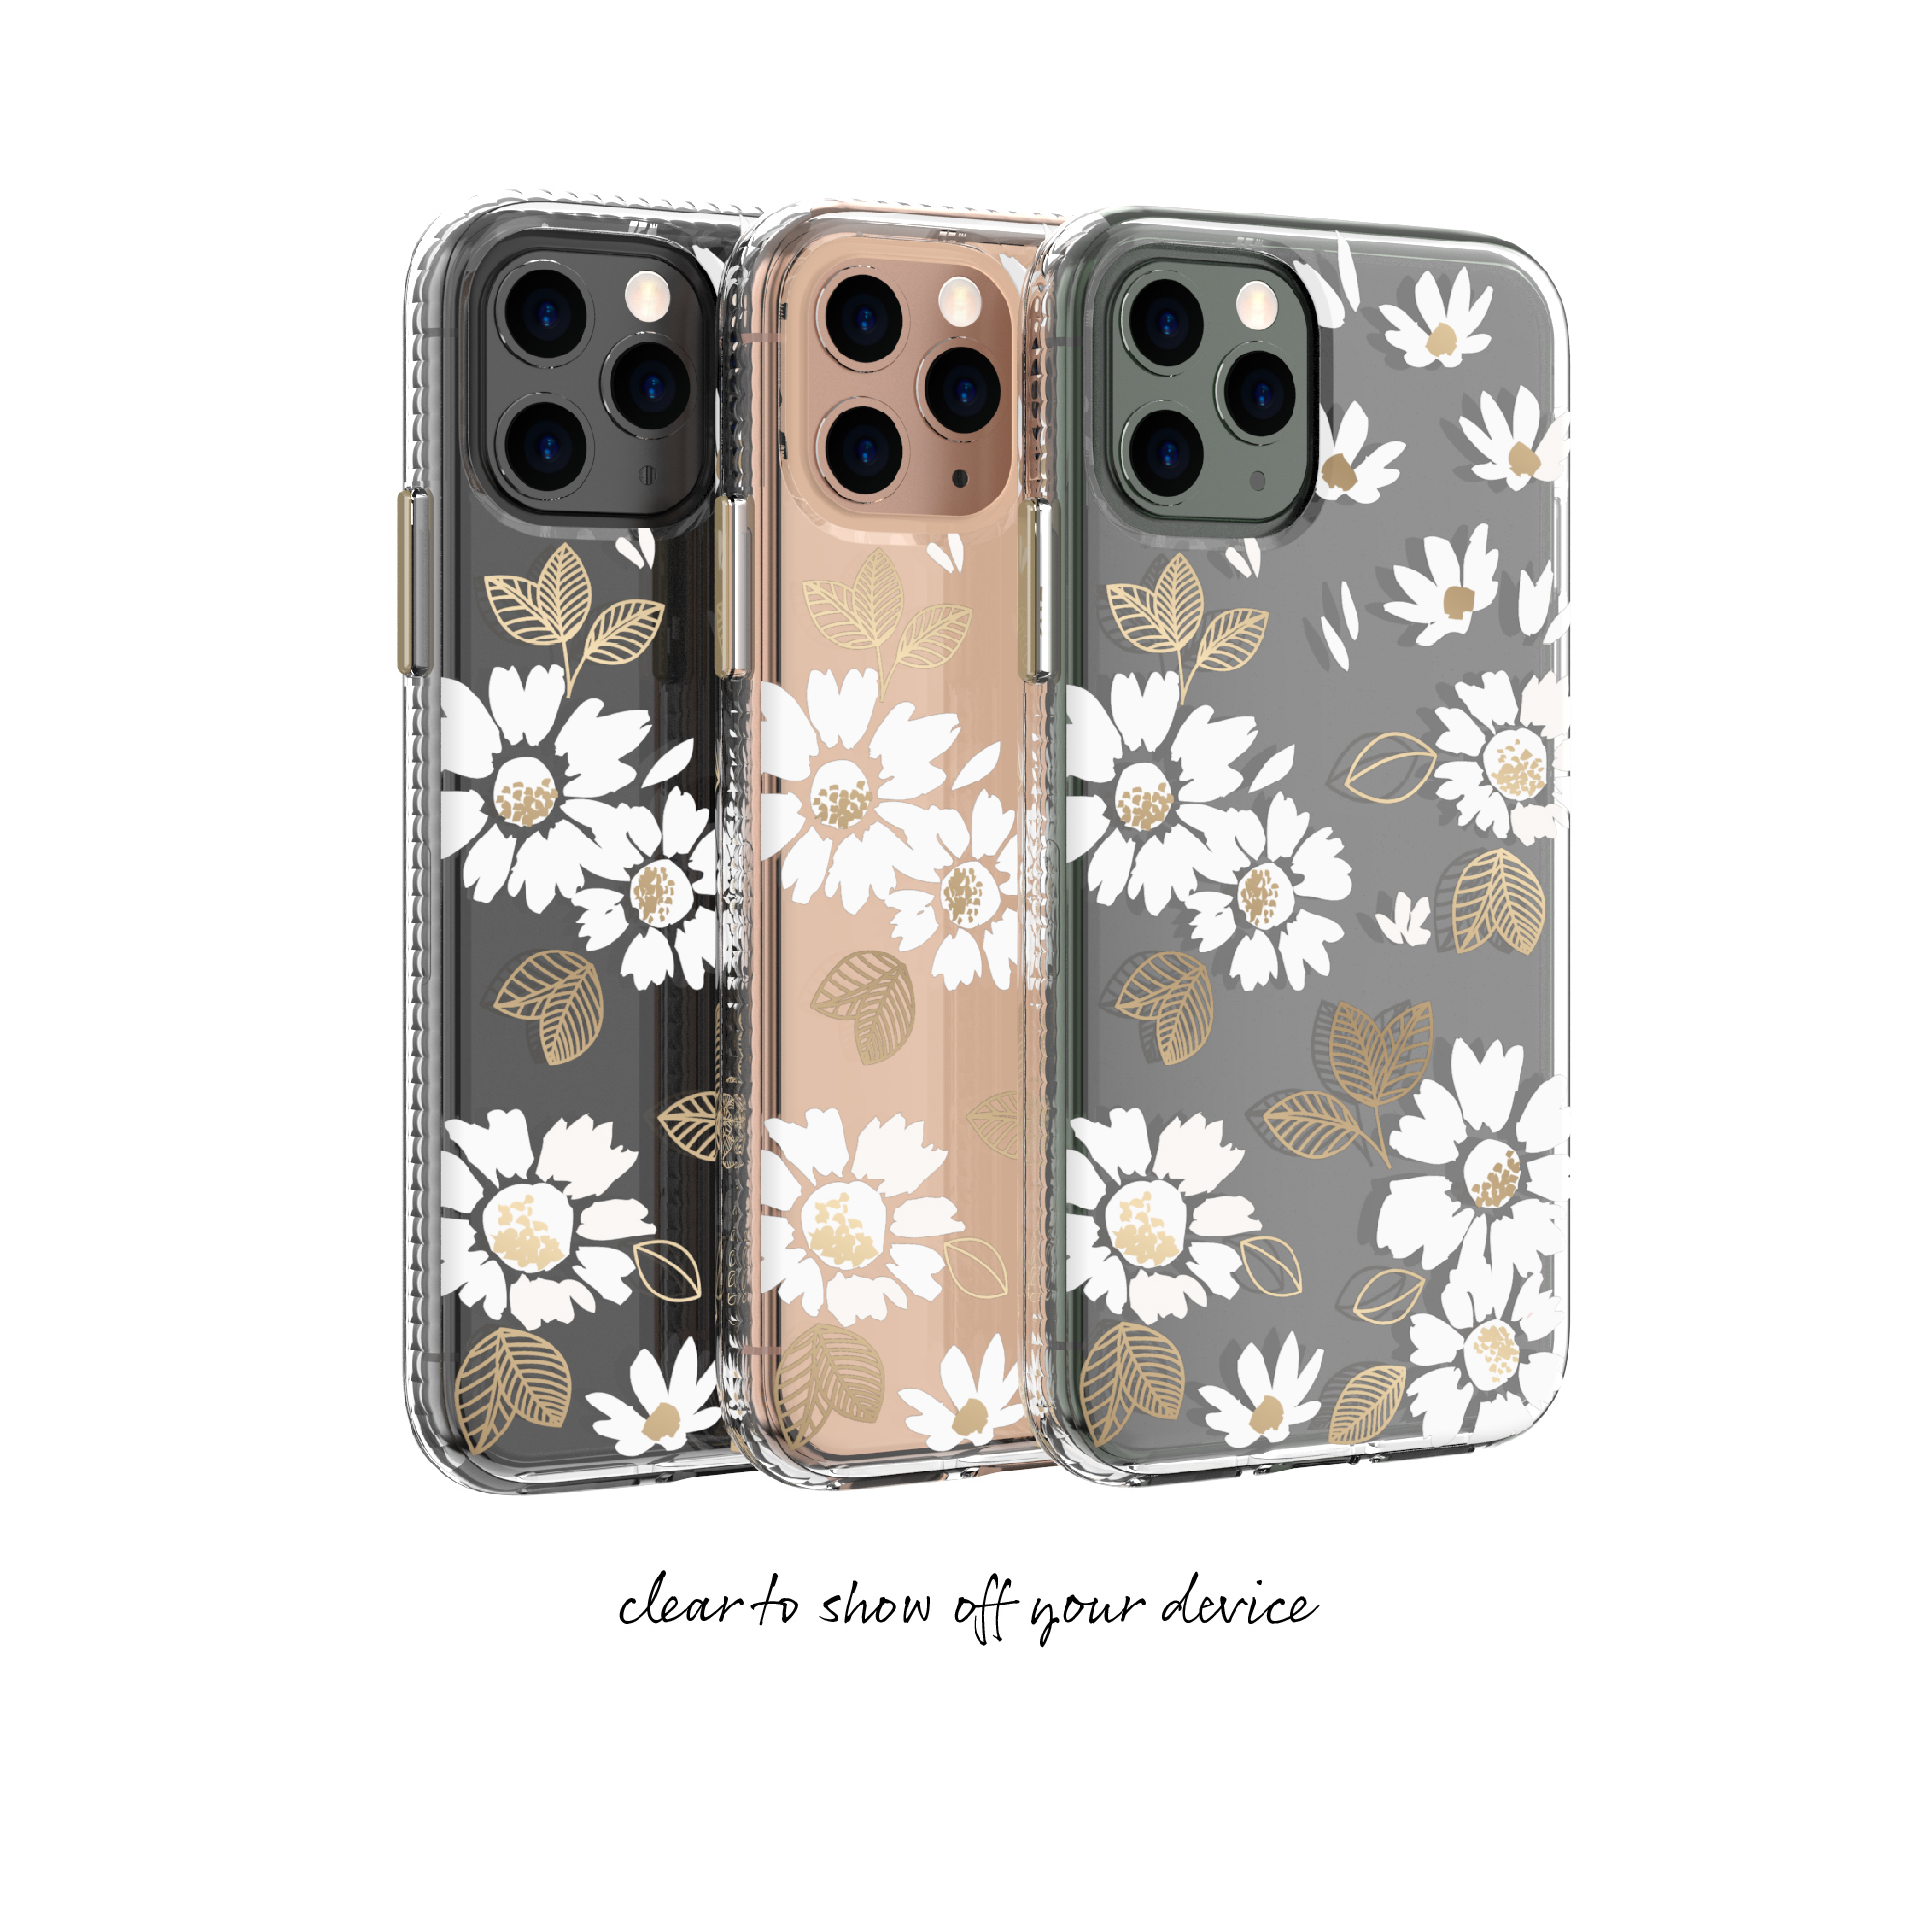 Clear White Floral Phone Case for iPhone 11 Pro - image 3 of 5